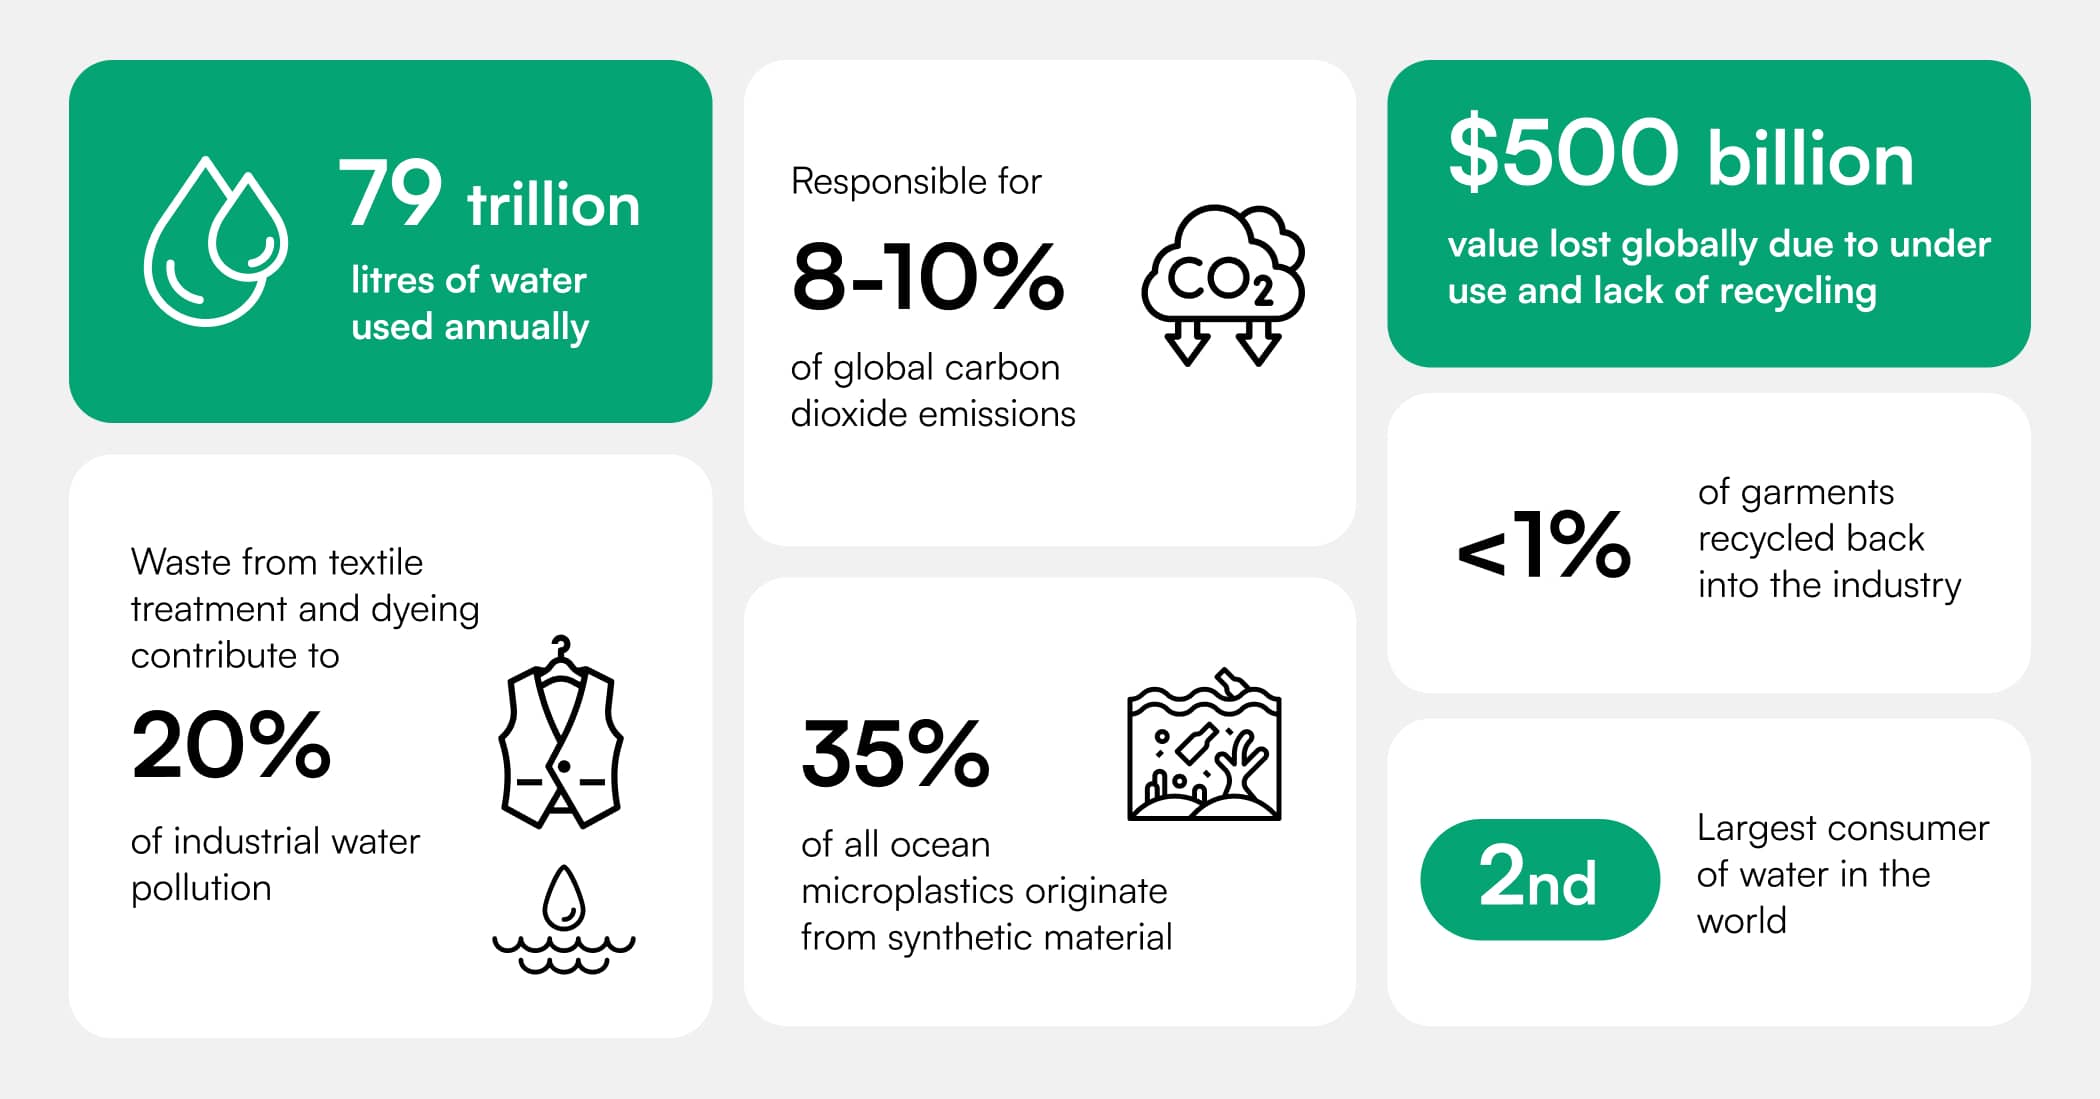 Infographic showing environmental impacts of fashion manufacturing, including water use, carbon emissions, pollution, recycling stats, and industry value loss.